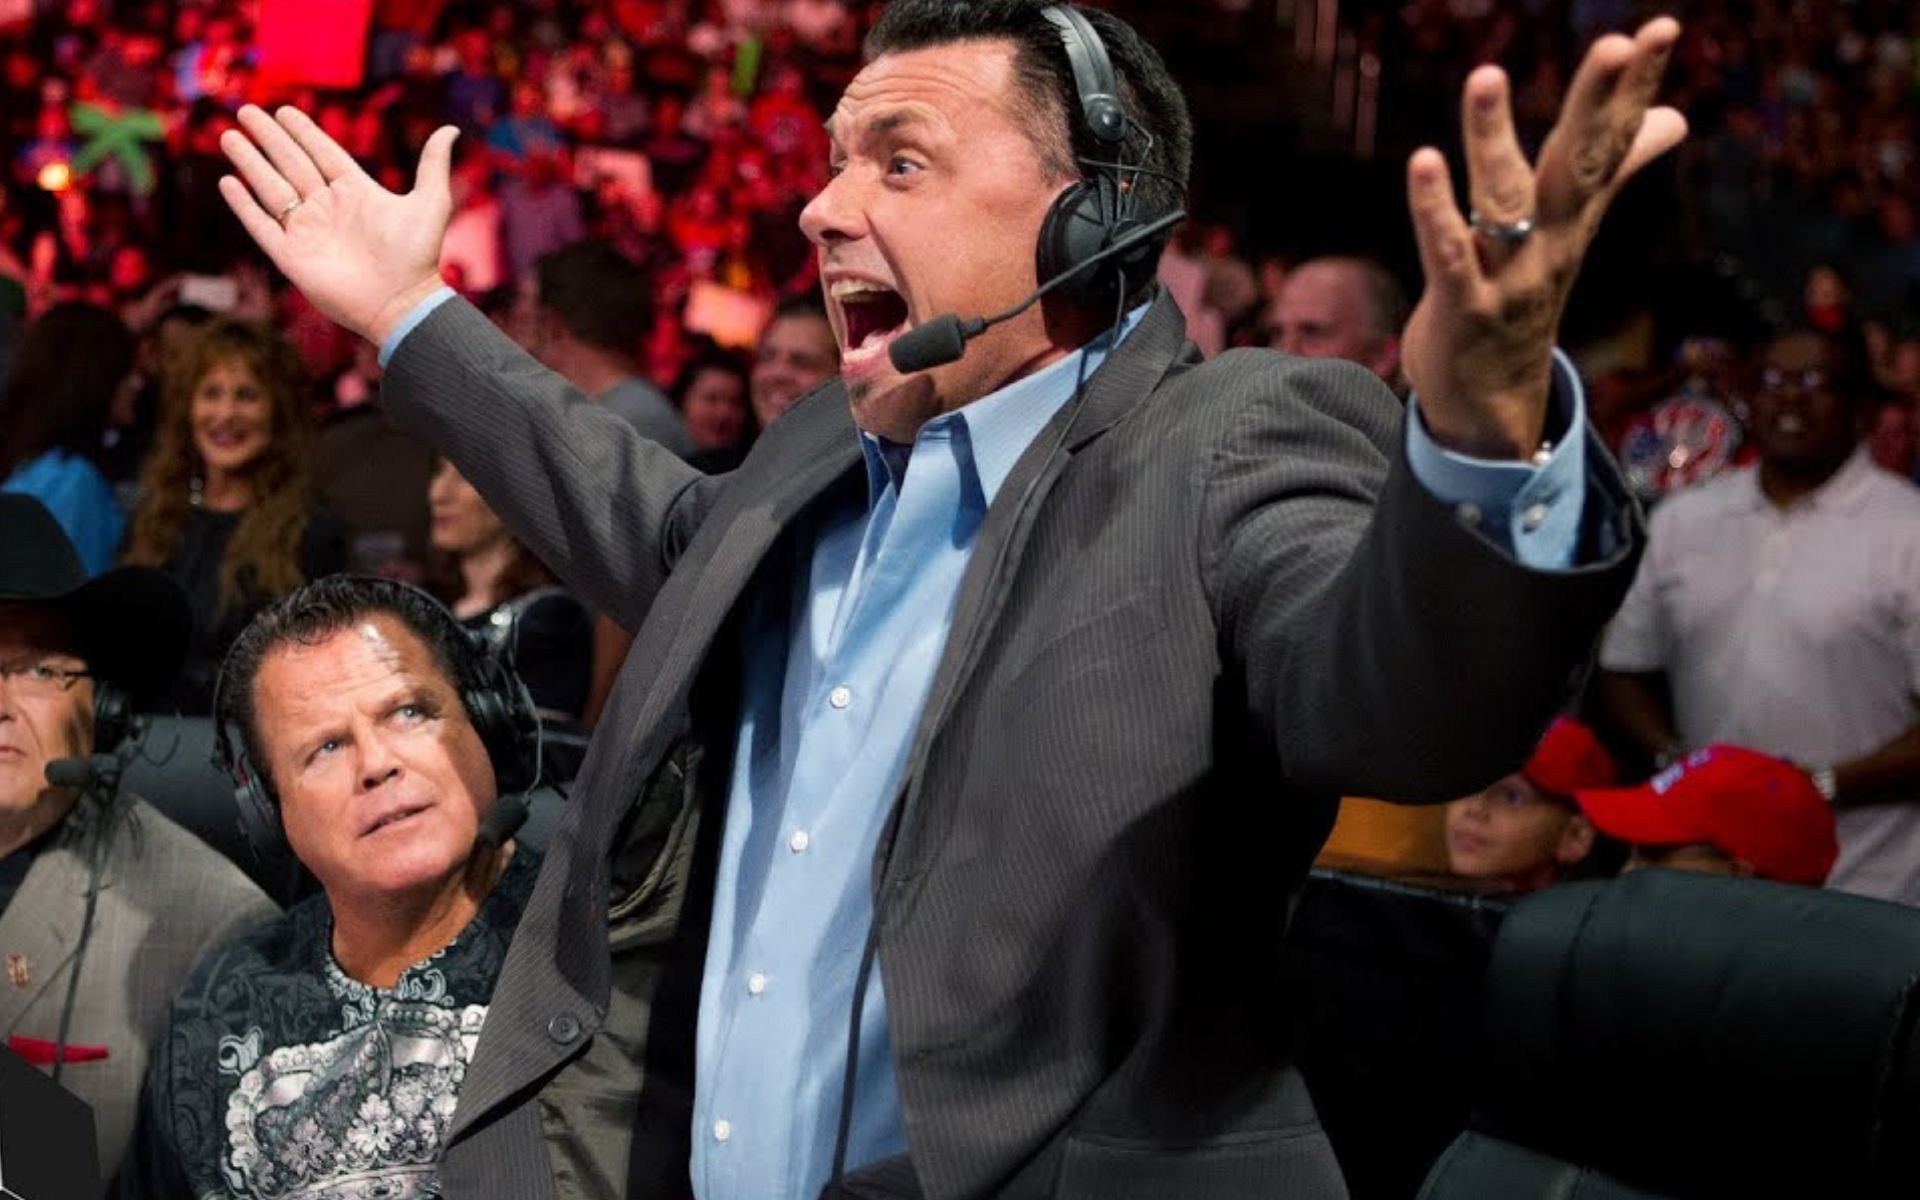 Michael Cole has been an integral part of the WWE announcing team over the last 25 years.